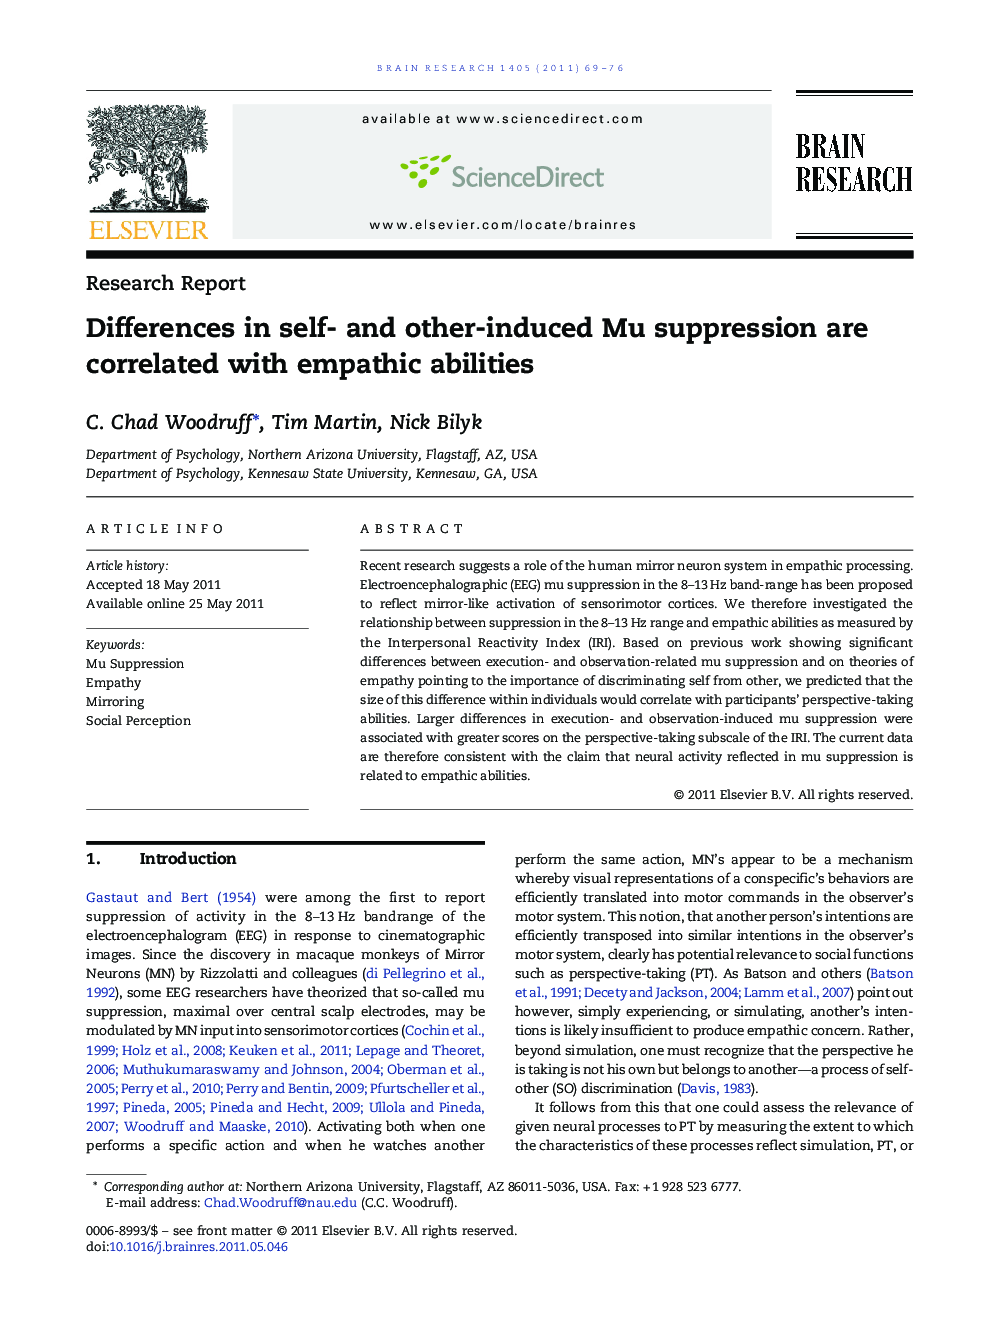 Research ReportDifferences in self- and other-induced Mu suppression are correlated with empathic abilities